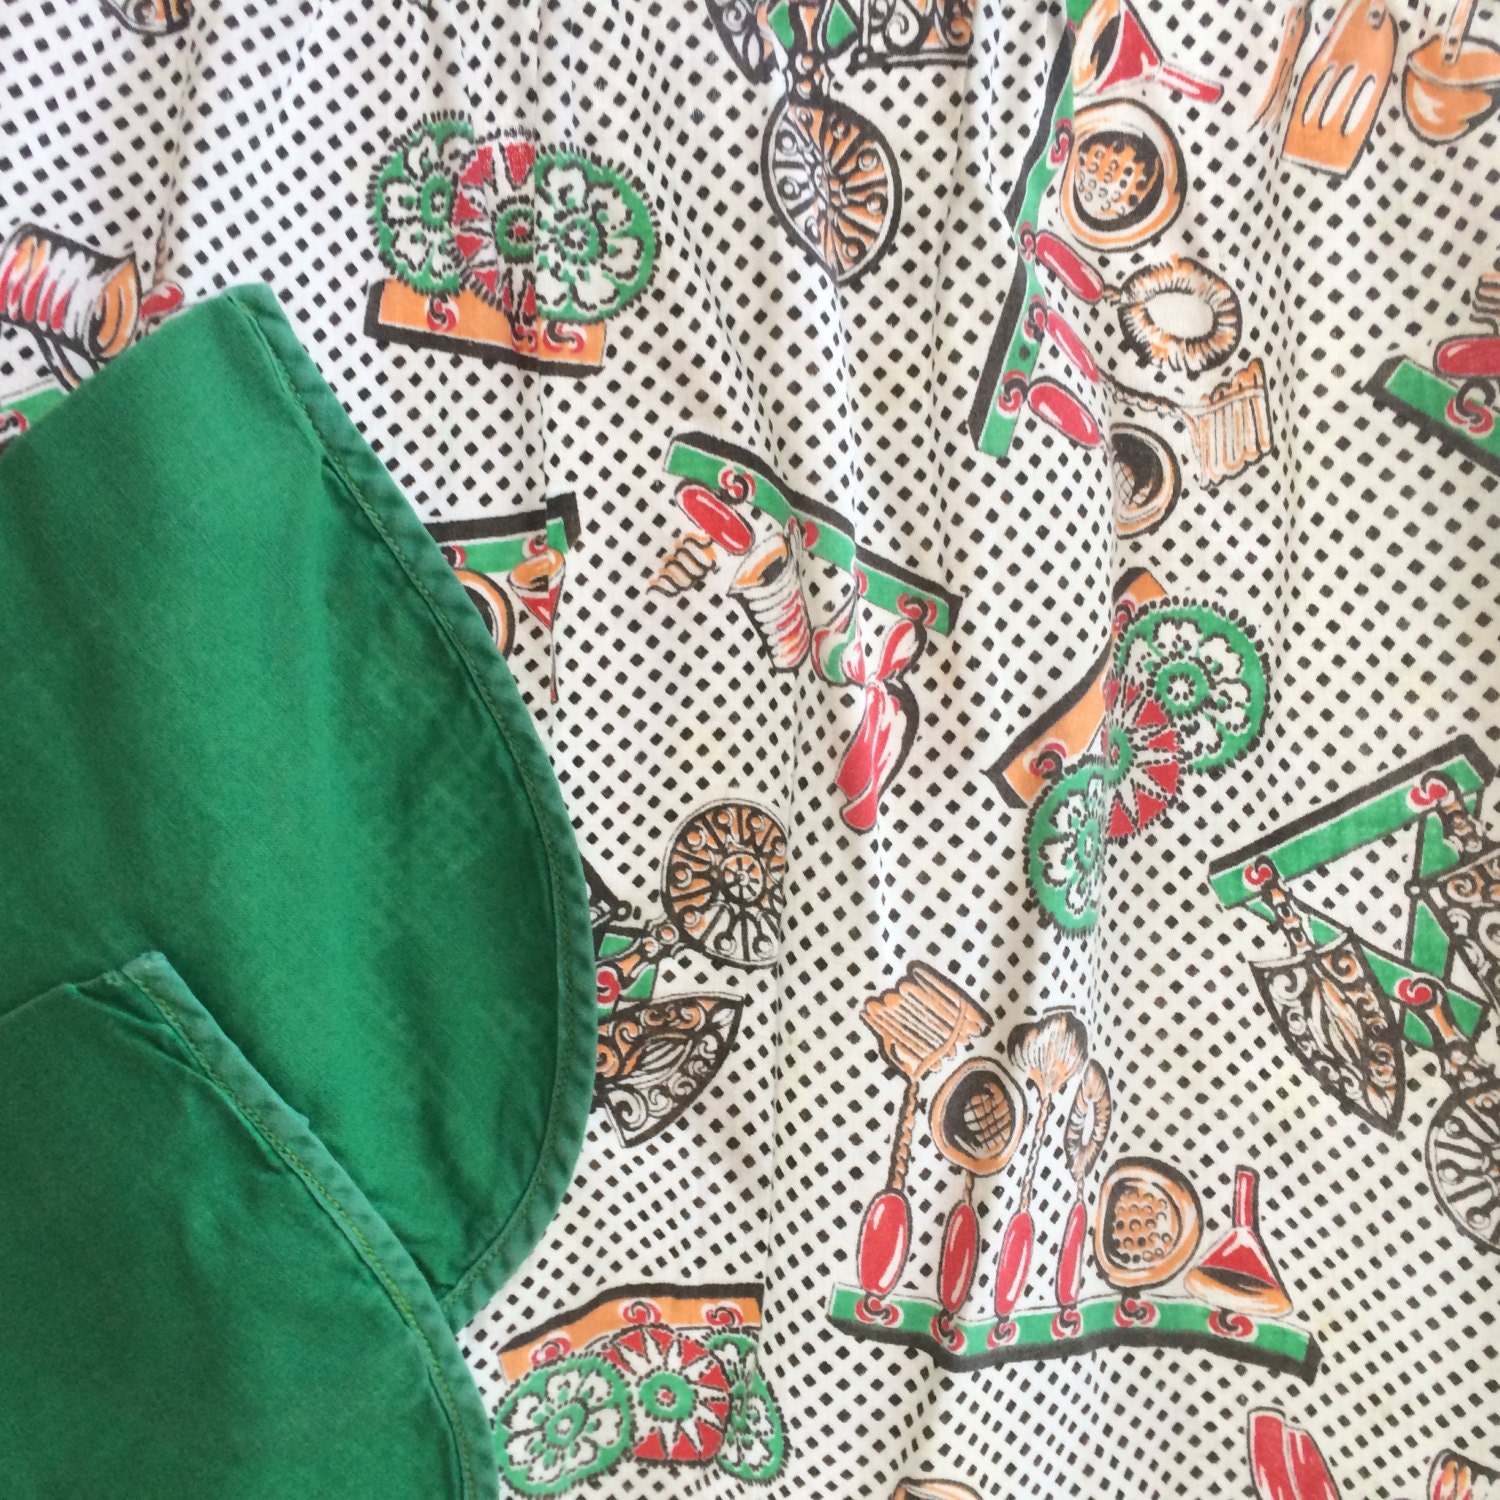 Old Fashioned Kitchen Print Half Apron With Double Pockets | Etsy